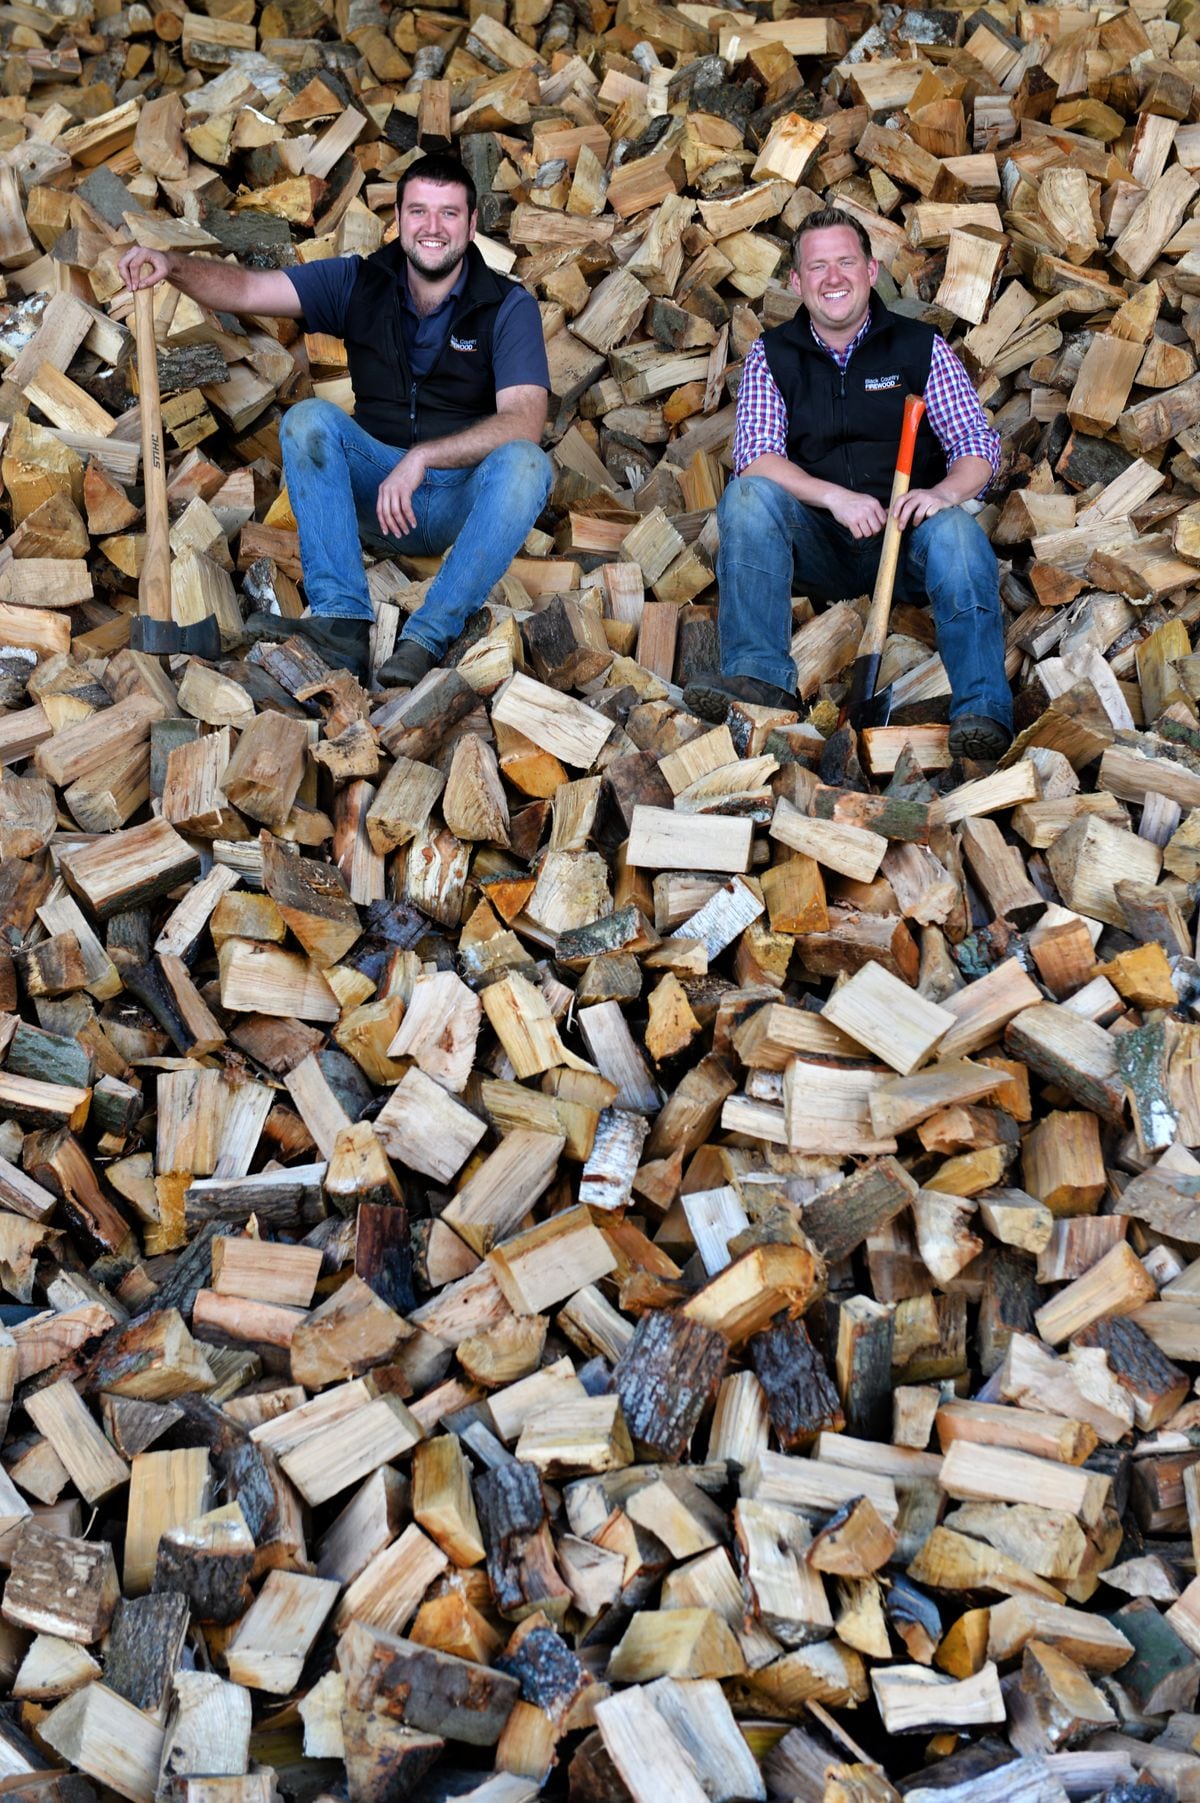 Black Country Firewood